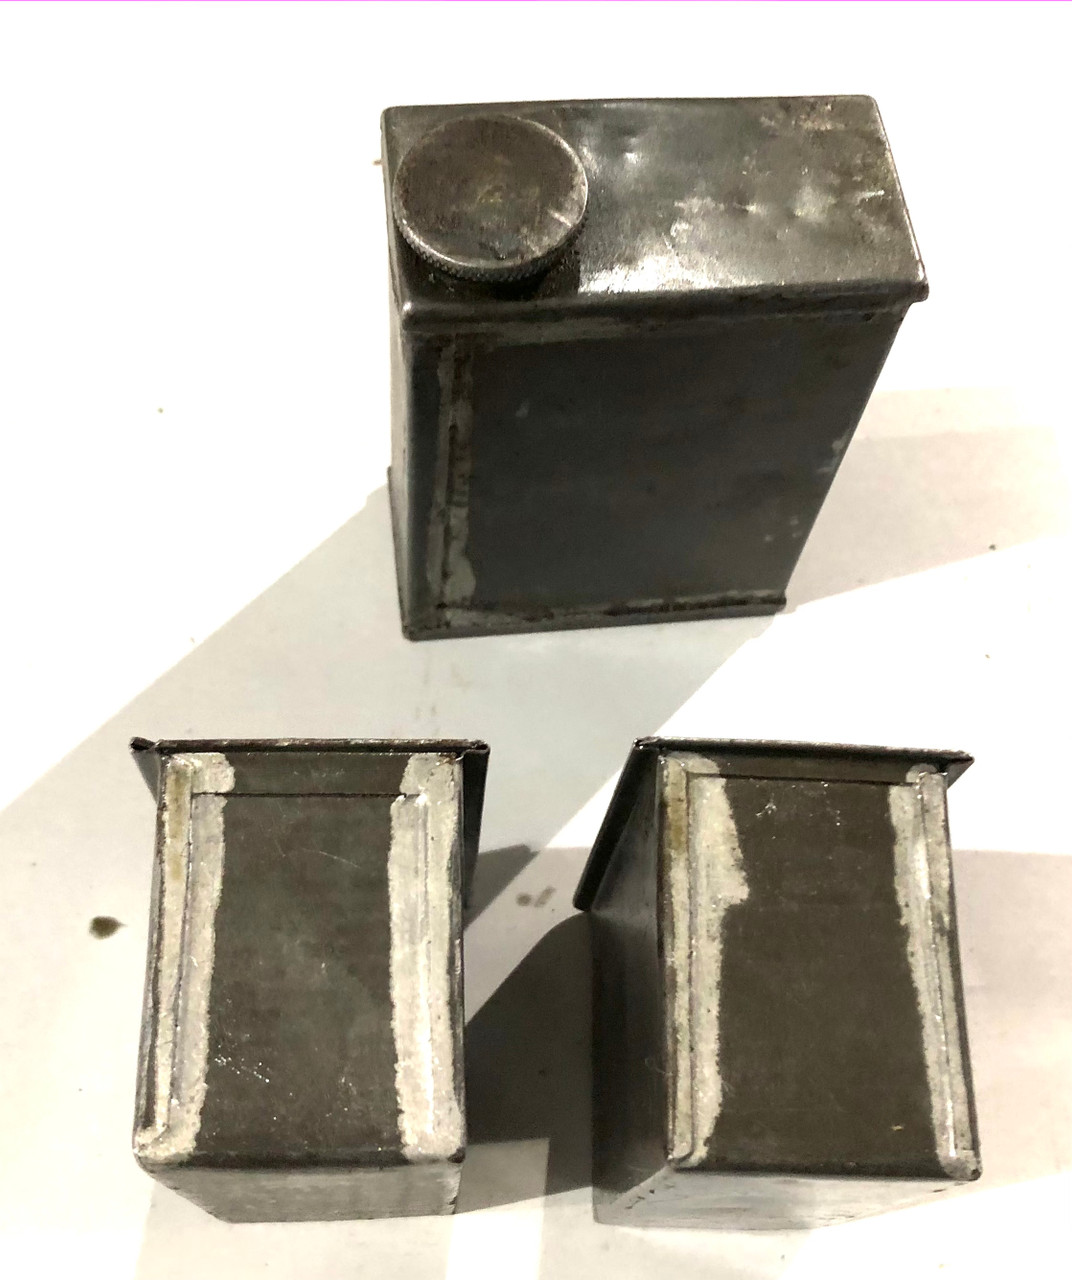 220310-03: Two x Vickers Small Parts Tins, 1 Mk1 Oil Bottle